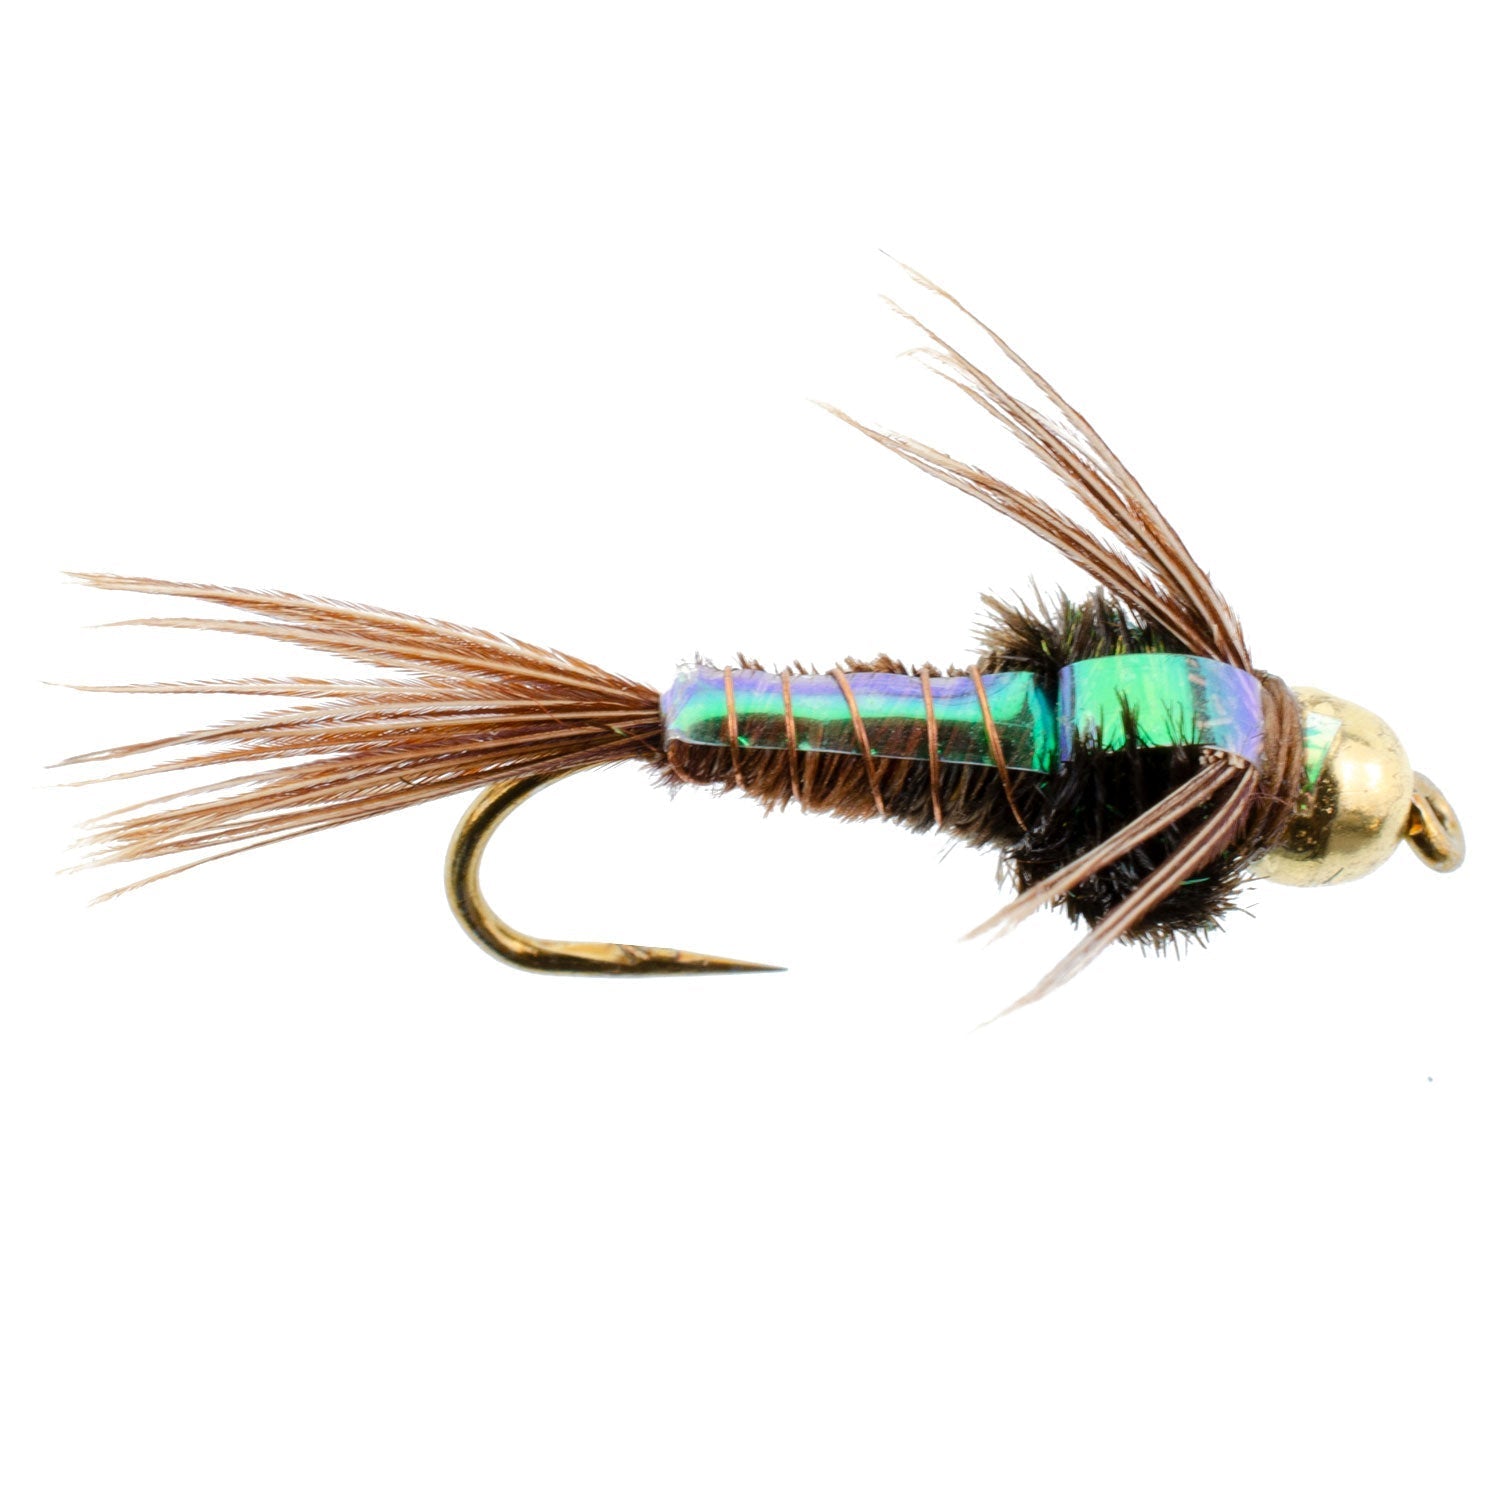 Barbless Bead Head Flashback Pheasant Tail Nymph Fly 6 Flies Hook Size 14